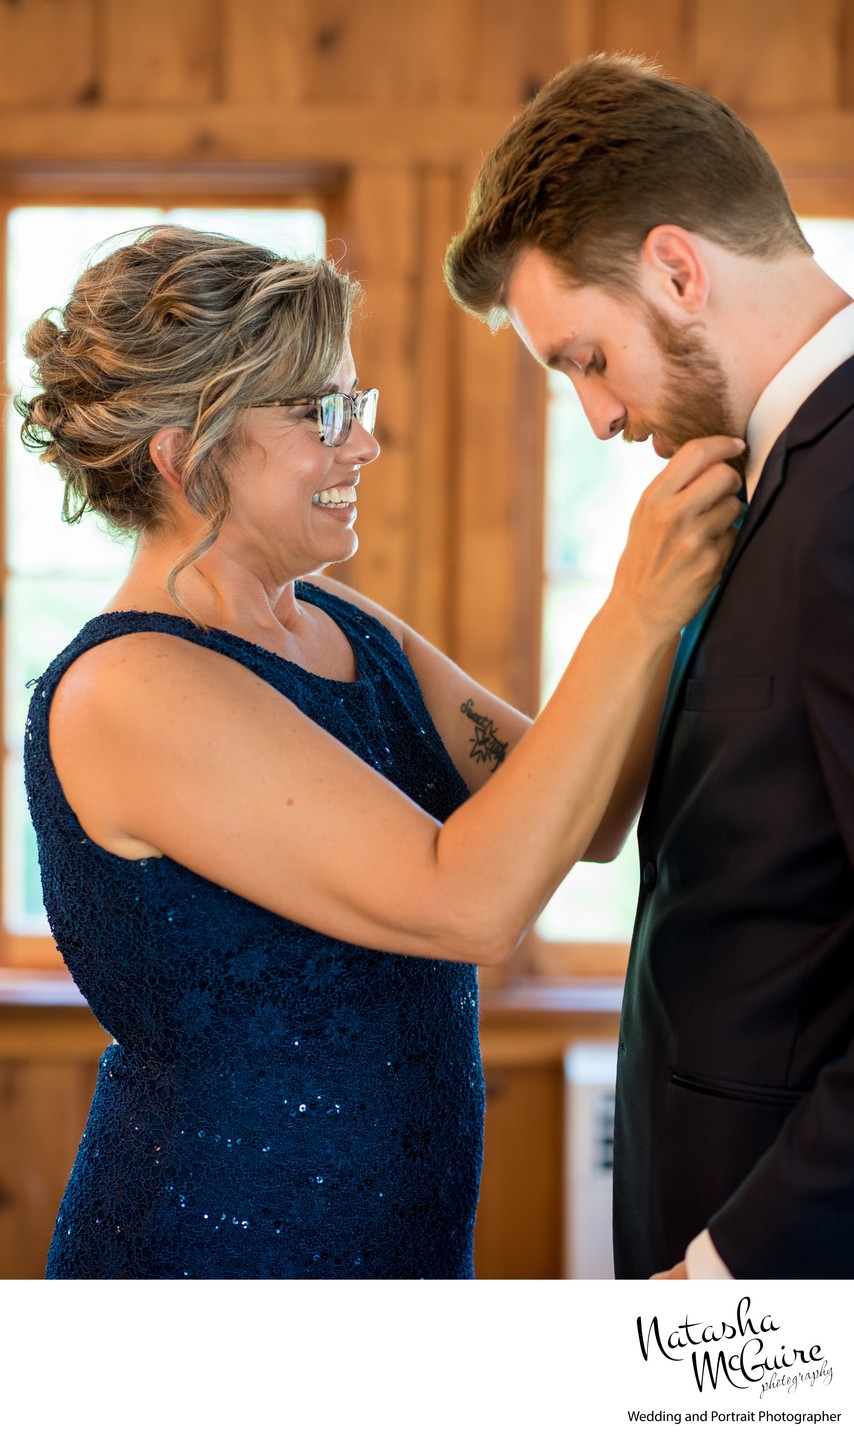 Mother helping son before wedding ceremony St Louis